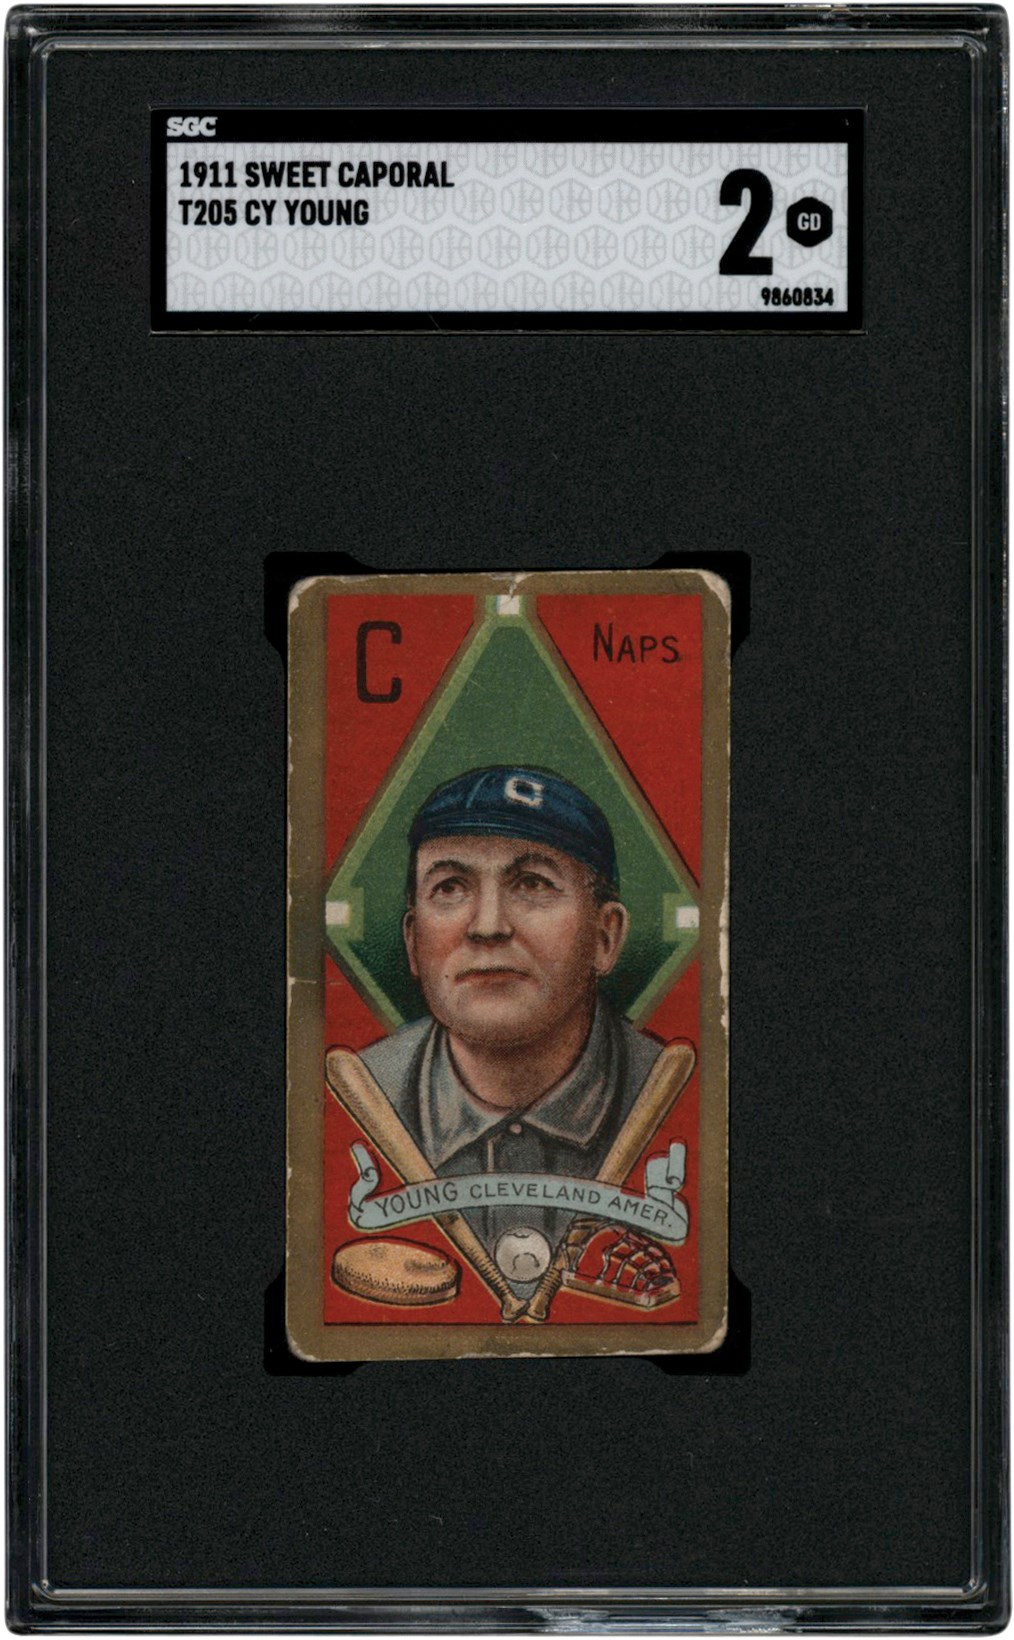 1911 T205 Cy Young SGC GD 2